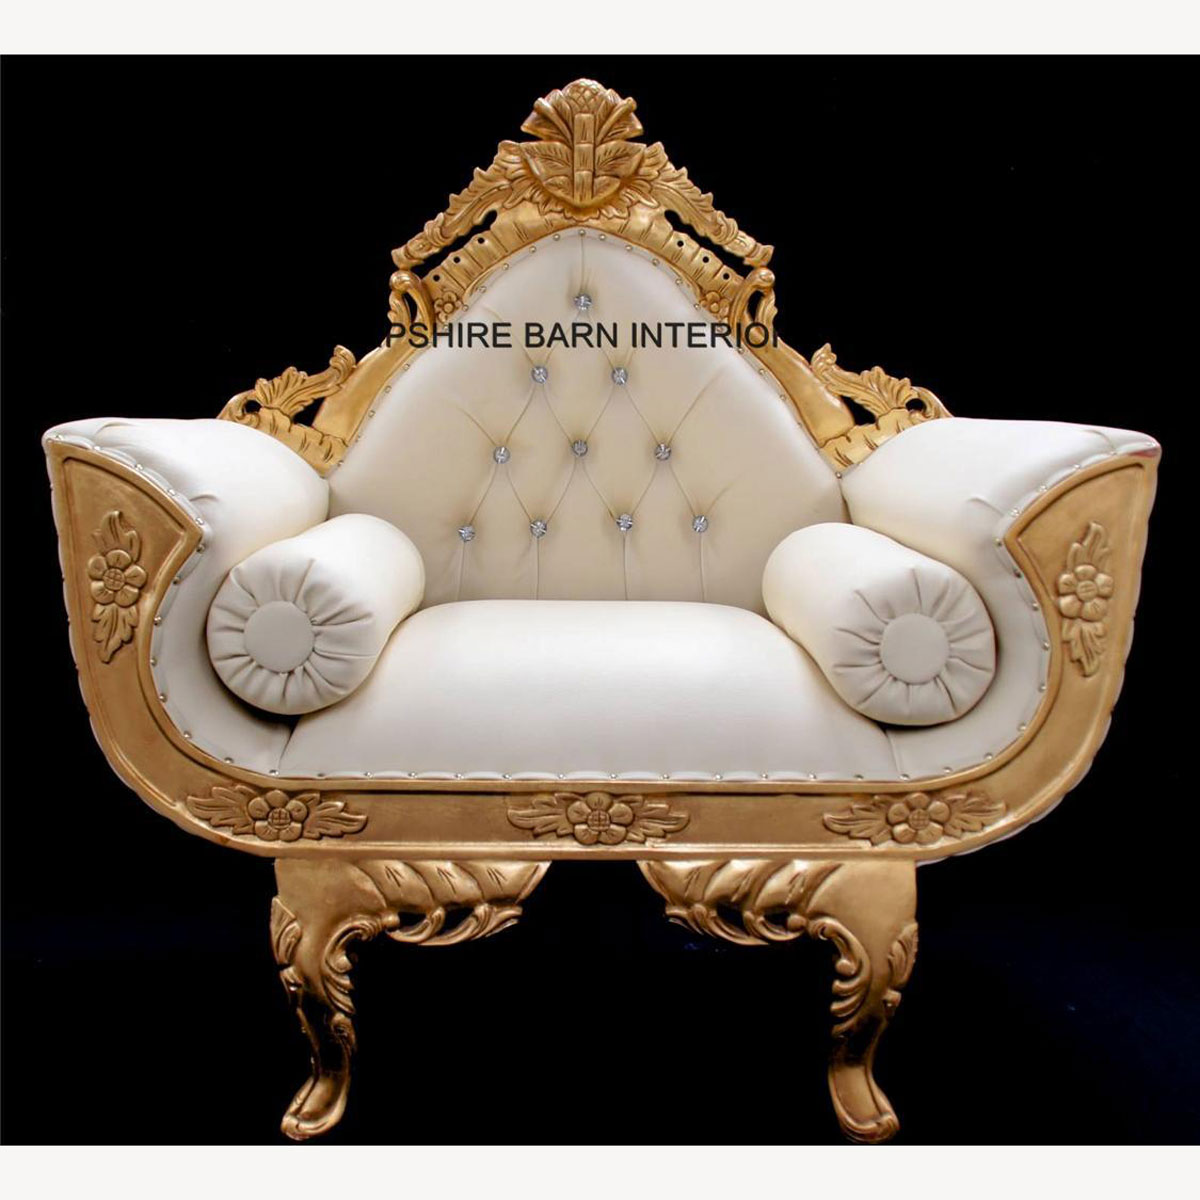 A Catherine Ornate Gold Royal Wedding 3 Piece Set Suite One Sofa And Two Chairs In Faux Cream Leather With Diamond Crystal Buttons 2 - Hampshire Barn Interiors - A Catherine Ornate Gold Royal Wedding 3 Piece Set / Suite (One Sofa And Two Chairs) In Faux Cream Leather With Diamond Crystal Buttons -